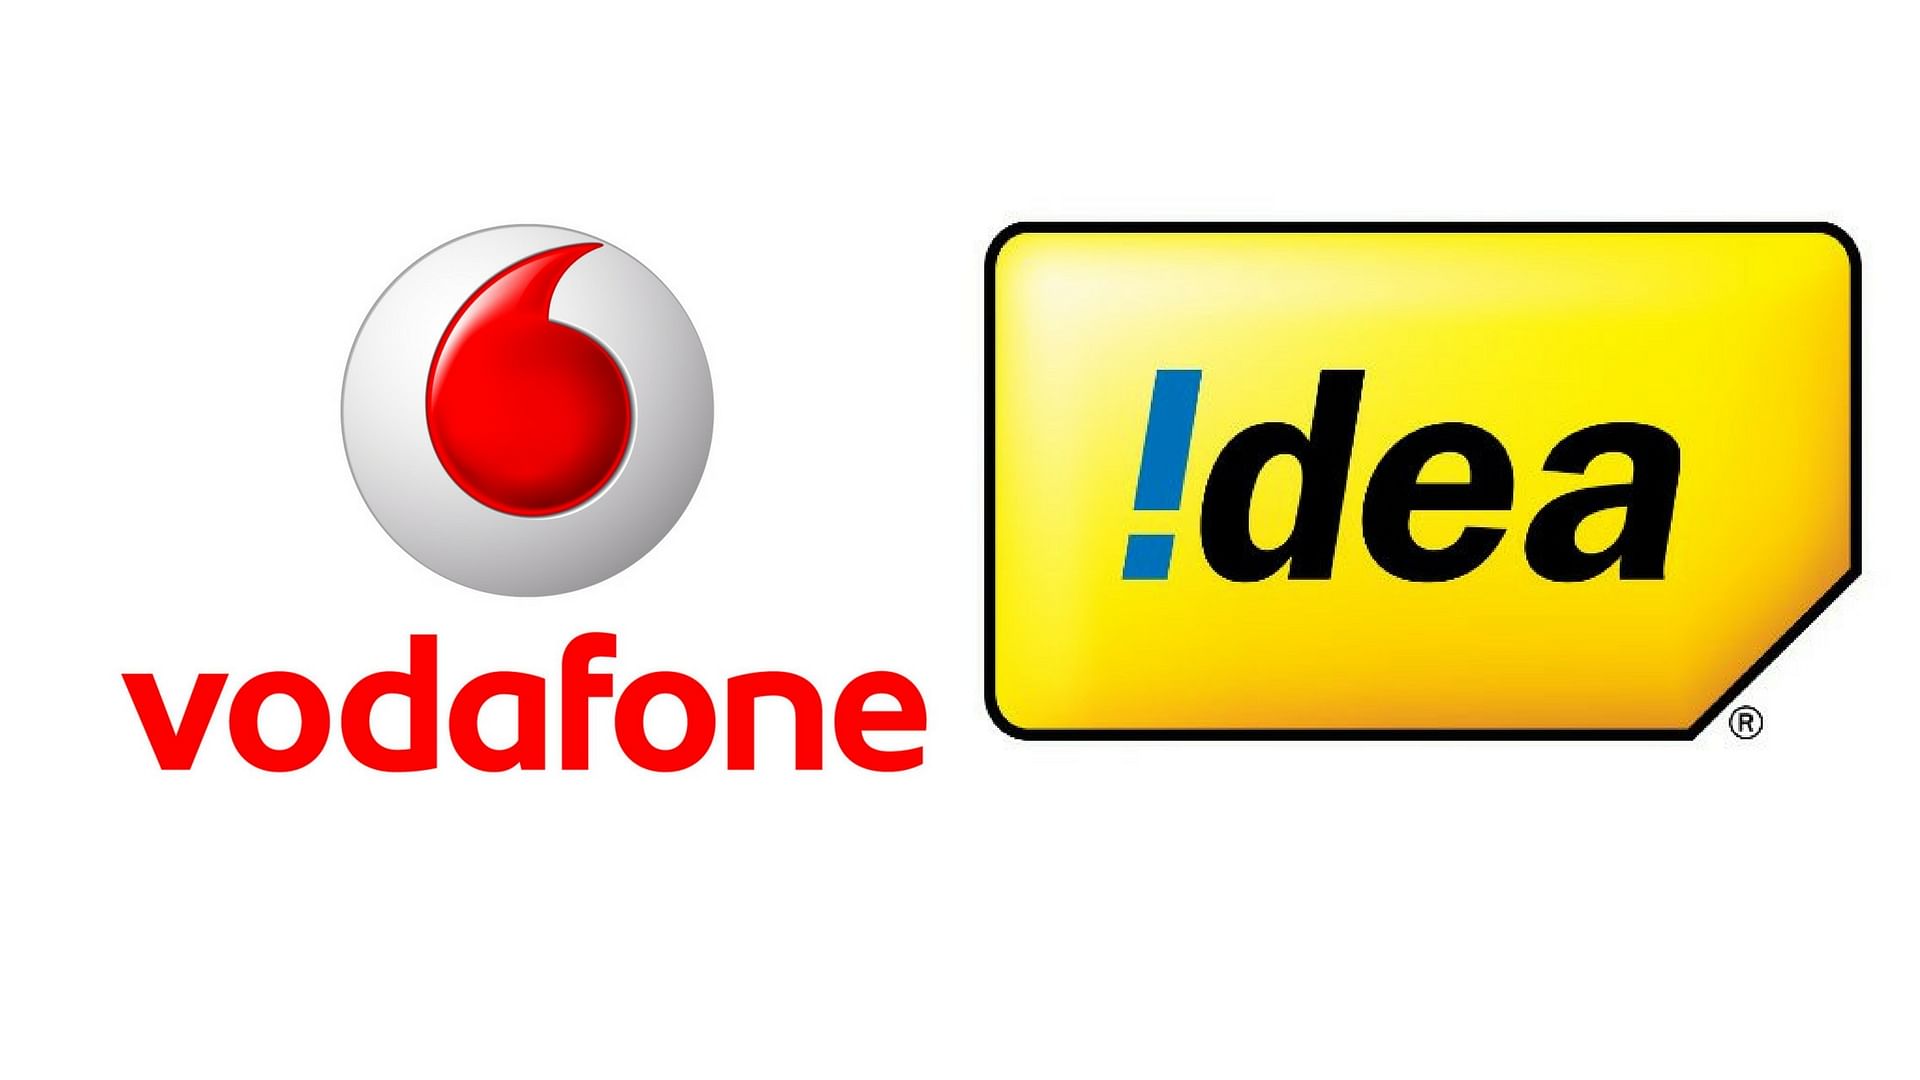 Vodafone Idea Limited Now Officially the Largest Telco in India